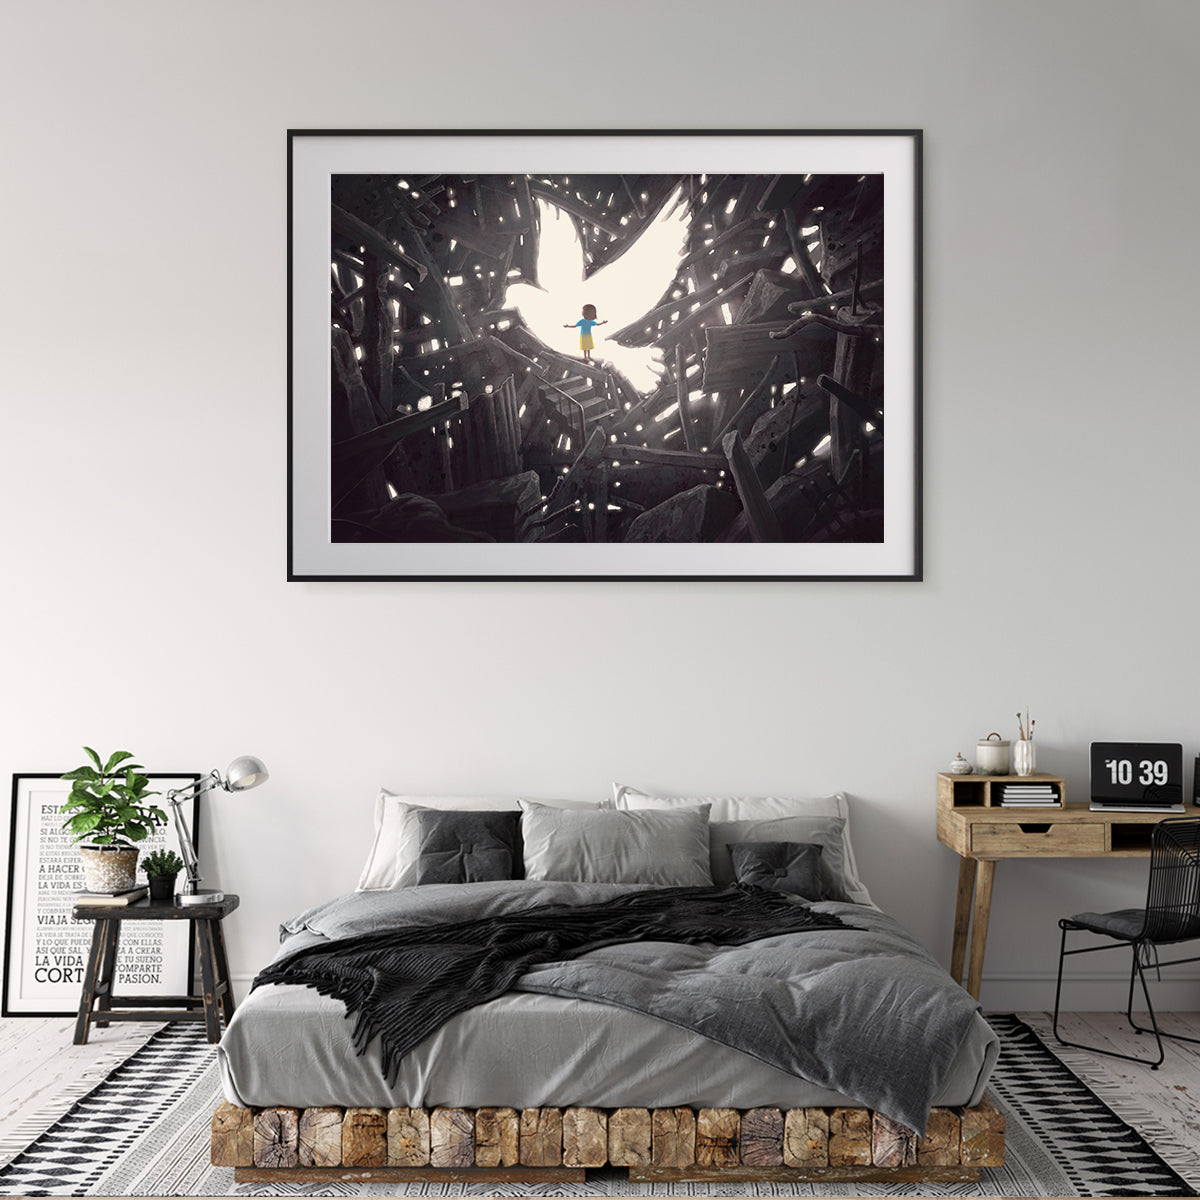 Freedom Motivational Posters Peace for Ukraine-Horizontal Posters NOT FRAMED-CetArt-10″x8″ inches-CetArt